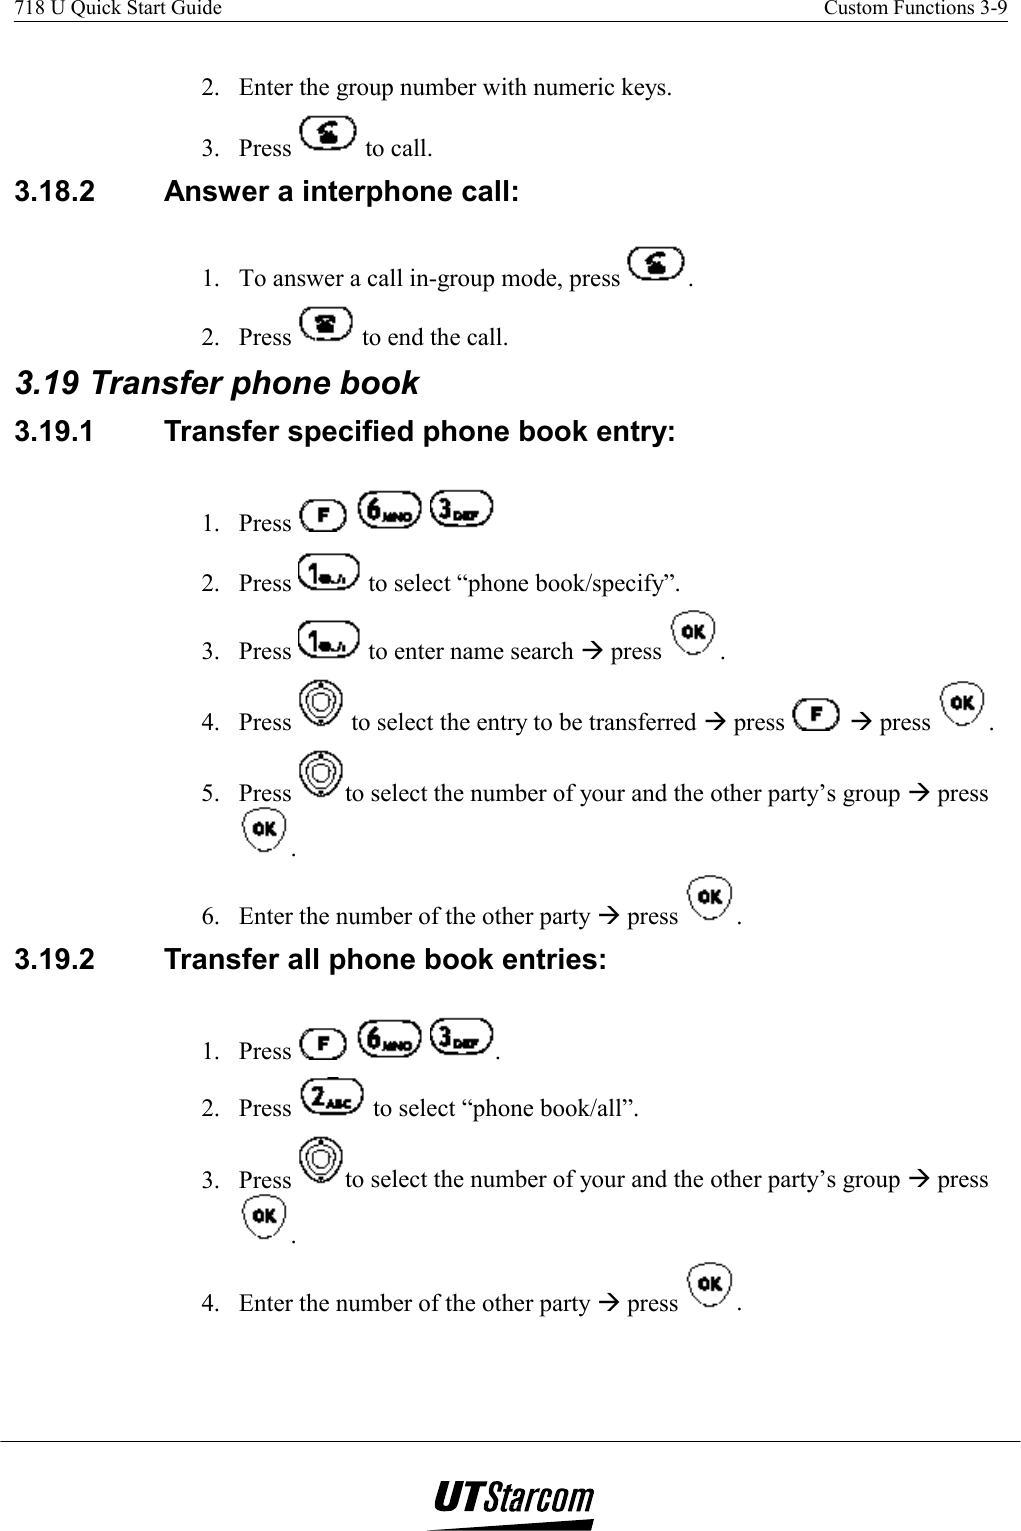 718 U Quick Start Guide    Custom Functions 3-9    2.  Enter the group number with numeric keys. 3. Press   to call. 3.18.2  Answer a interphone call: 1.  To answer a call in-group mode, press  . 2. Press   to end the call. 3.19 Transfer phone book 3.19.1  Transfer specified phone book entry:  1. Press       2. Press   to select “phone book/specify”. 3. Press   to enter name search Æ press  . 4. Press   to select the entry to be transferred Æ press   Æ press  . 5. Press  to select the number of your and the other party’s group Æ press . 6.  Enter the number of the other party Æ press  . 3.19.2  Transfer all phone book entries:  1. Press      . 2. Press   to select “phone book/all”. 3. Press  to select the number of your and the other party’s group Æ press . 4.  Enter the number of the other party Æ press  . 